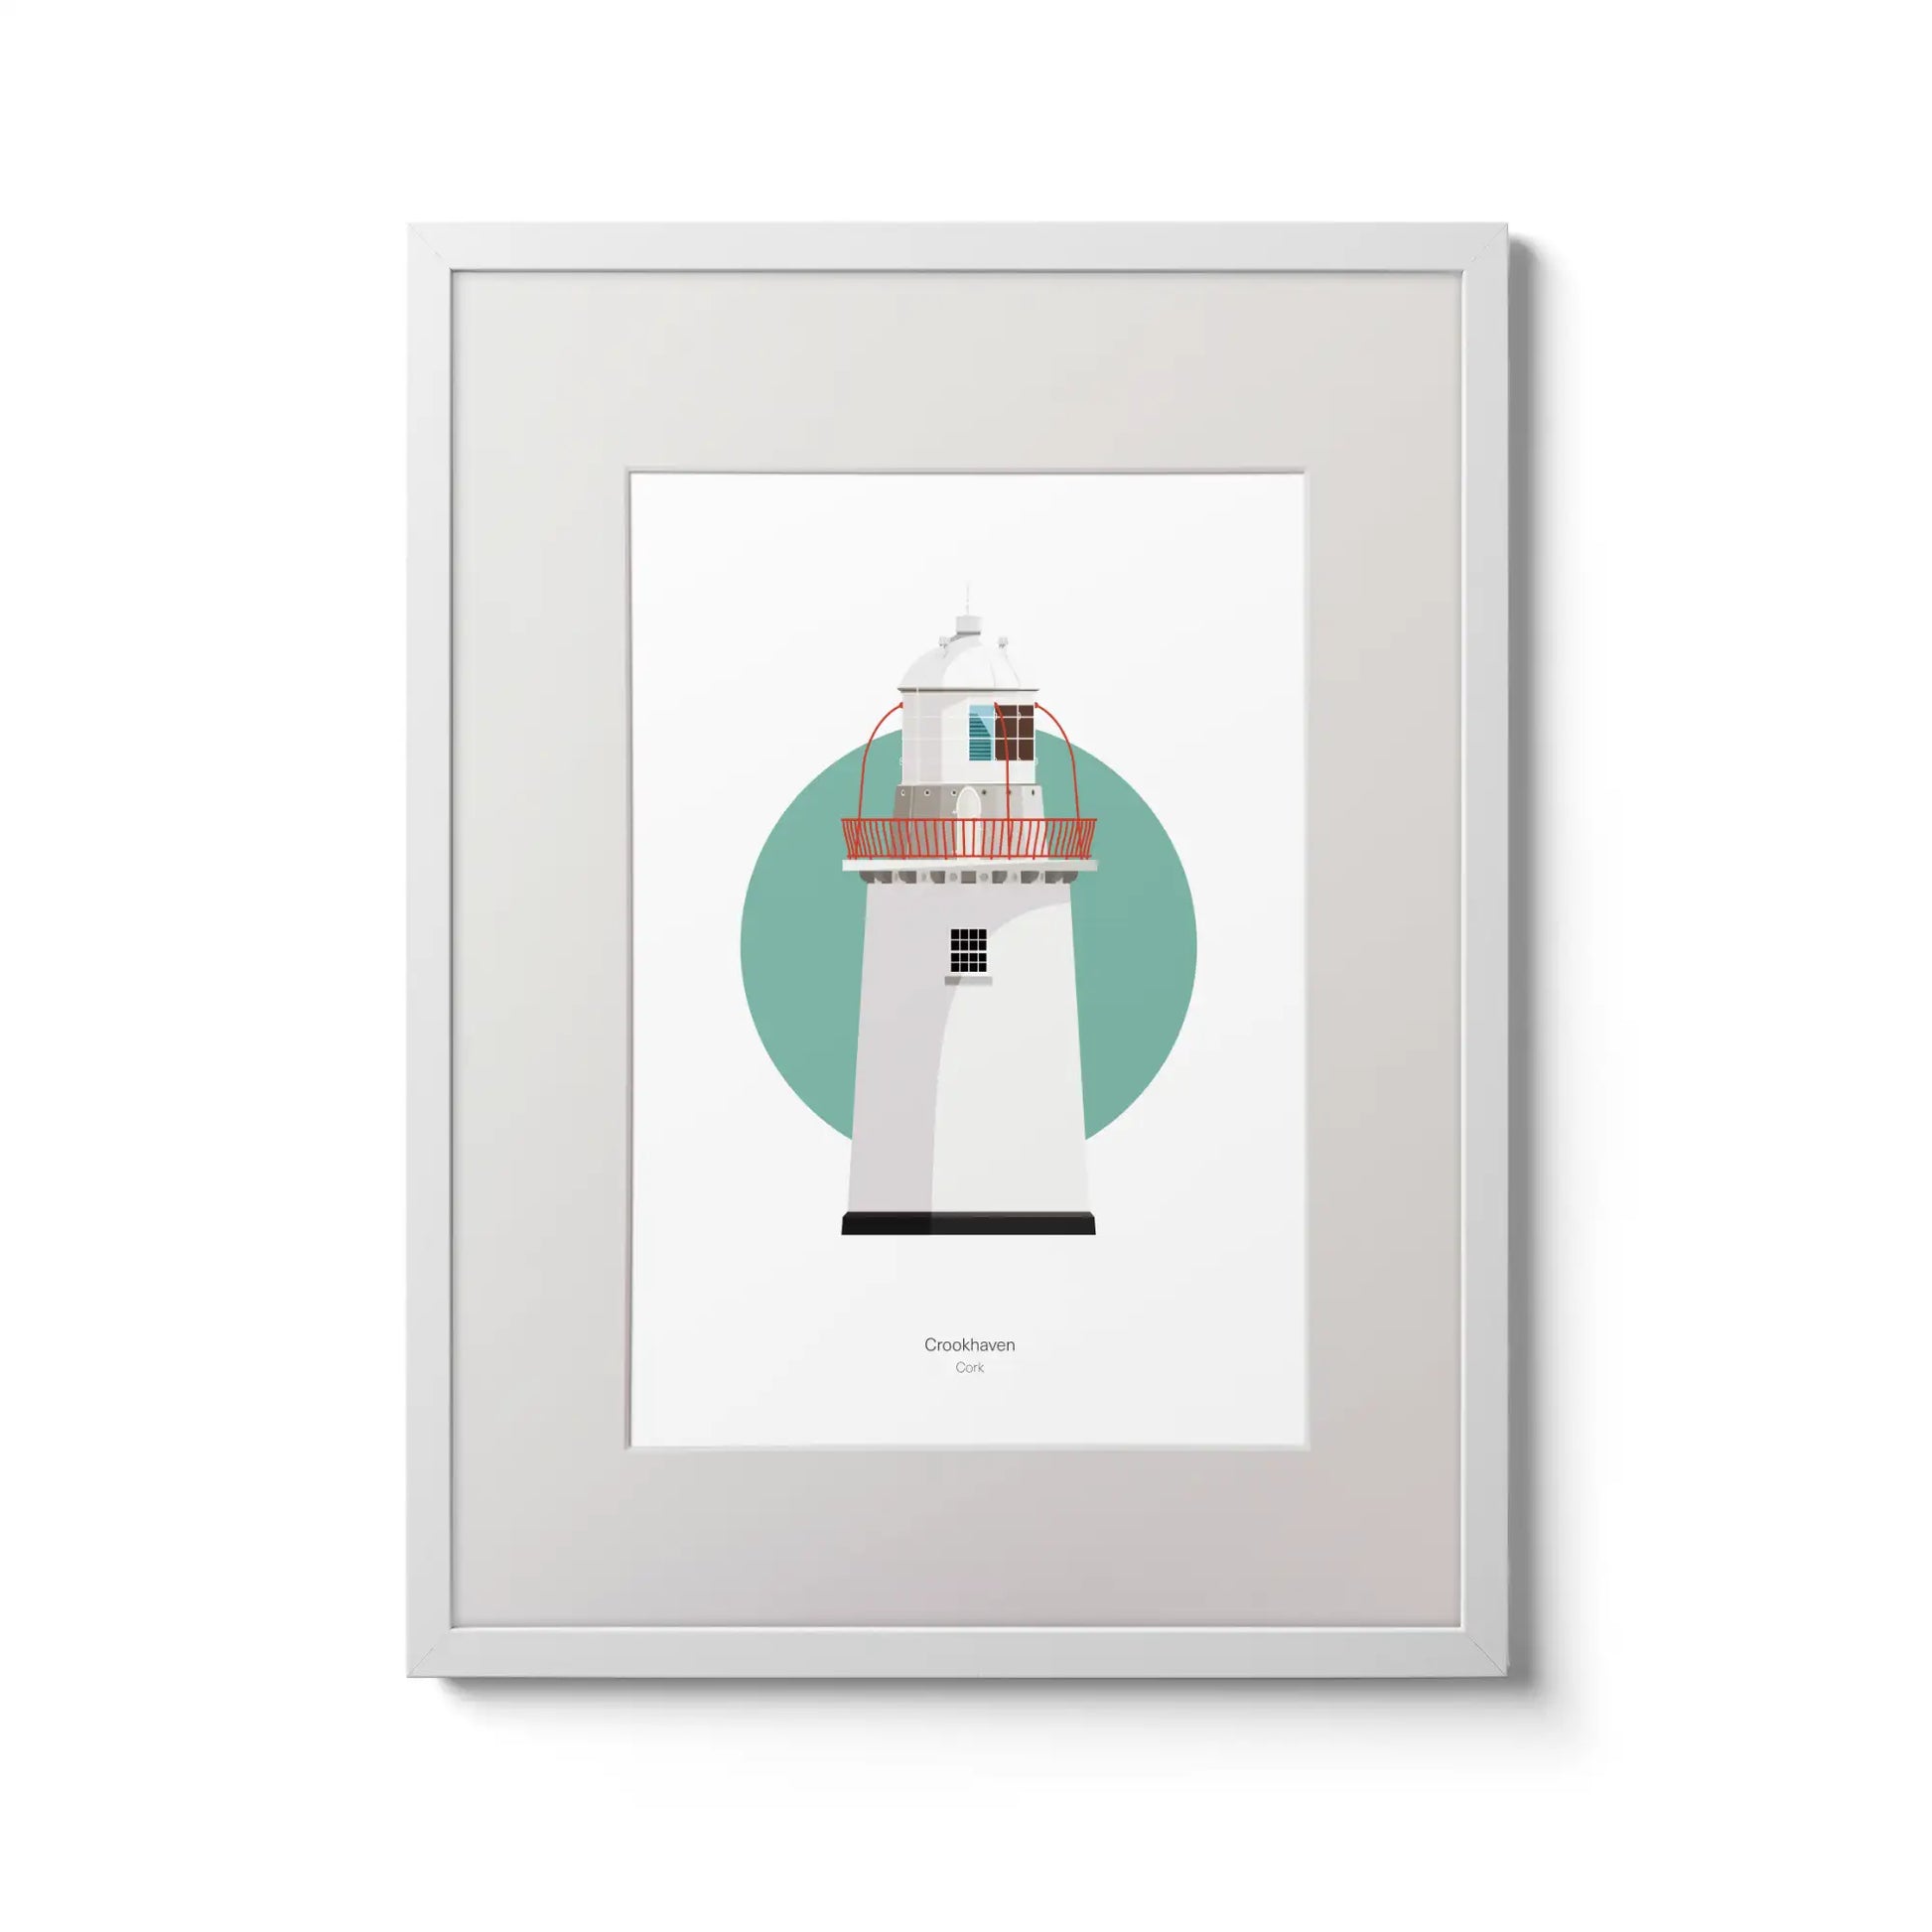 Illustration of Crookhaven lighthouse on a white background inside light blue square,  in a white frame measuring 30x40cm.